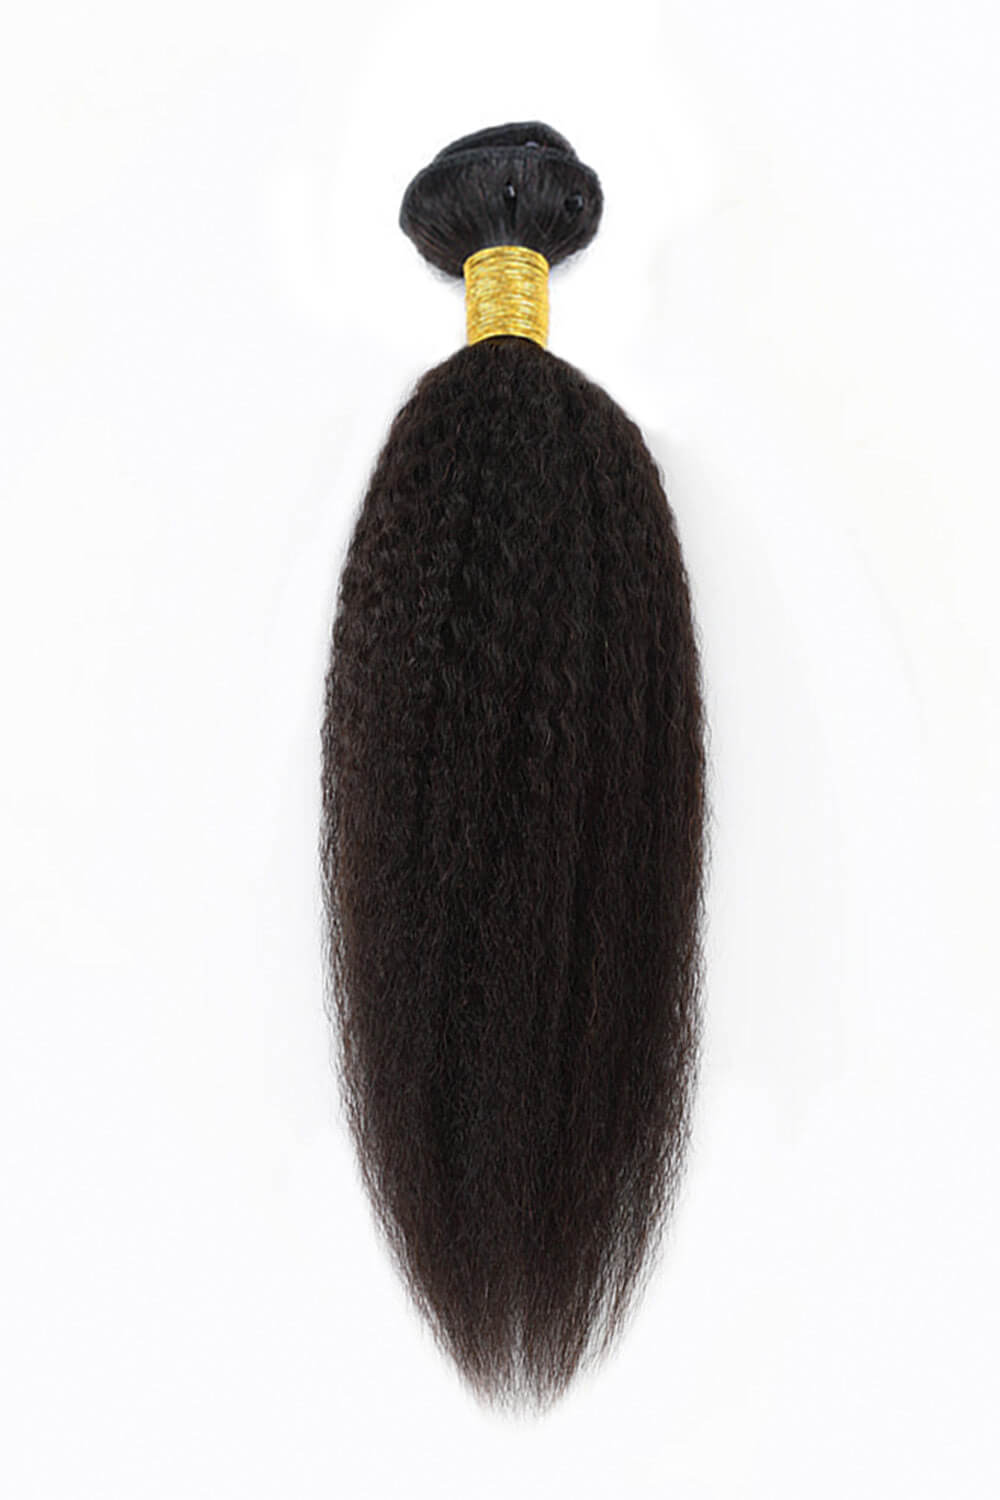 weft-hair-extensions-with-microbeads-kinky-curly-black-virgin-hair-2